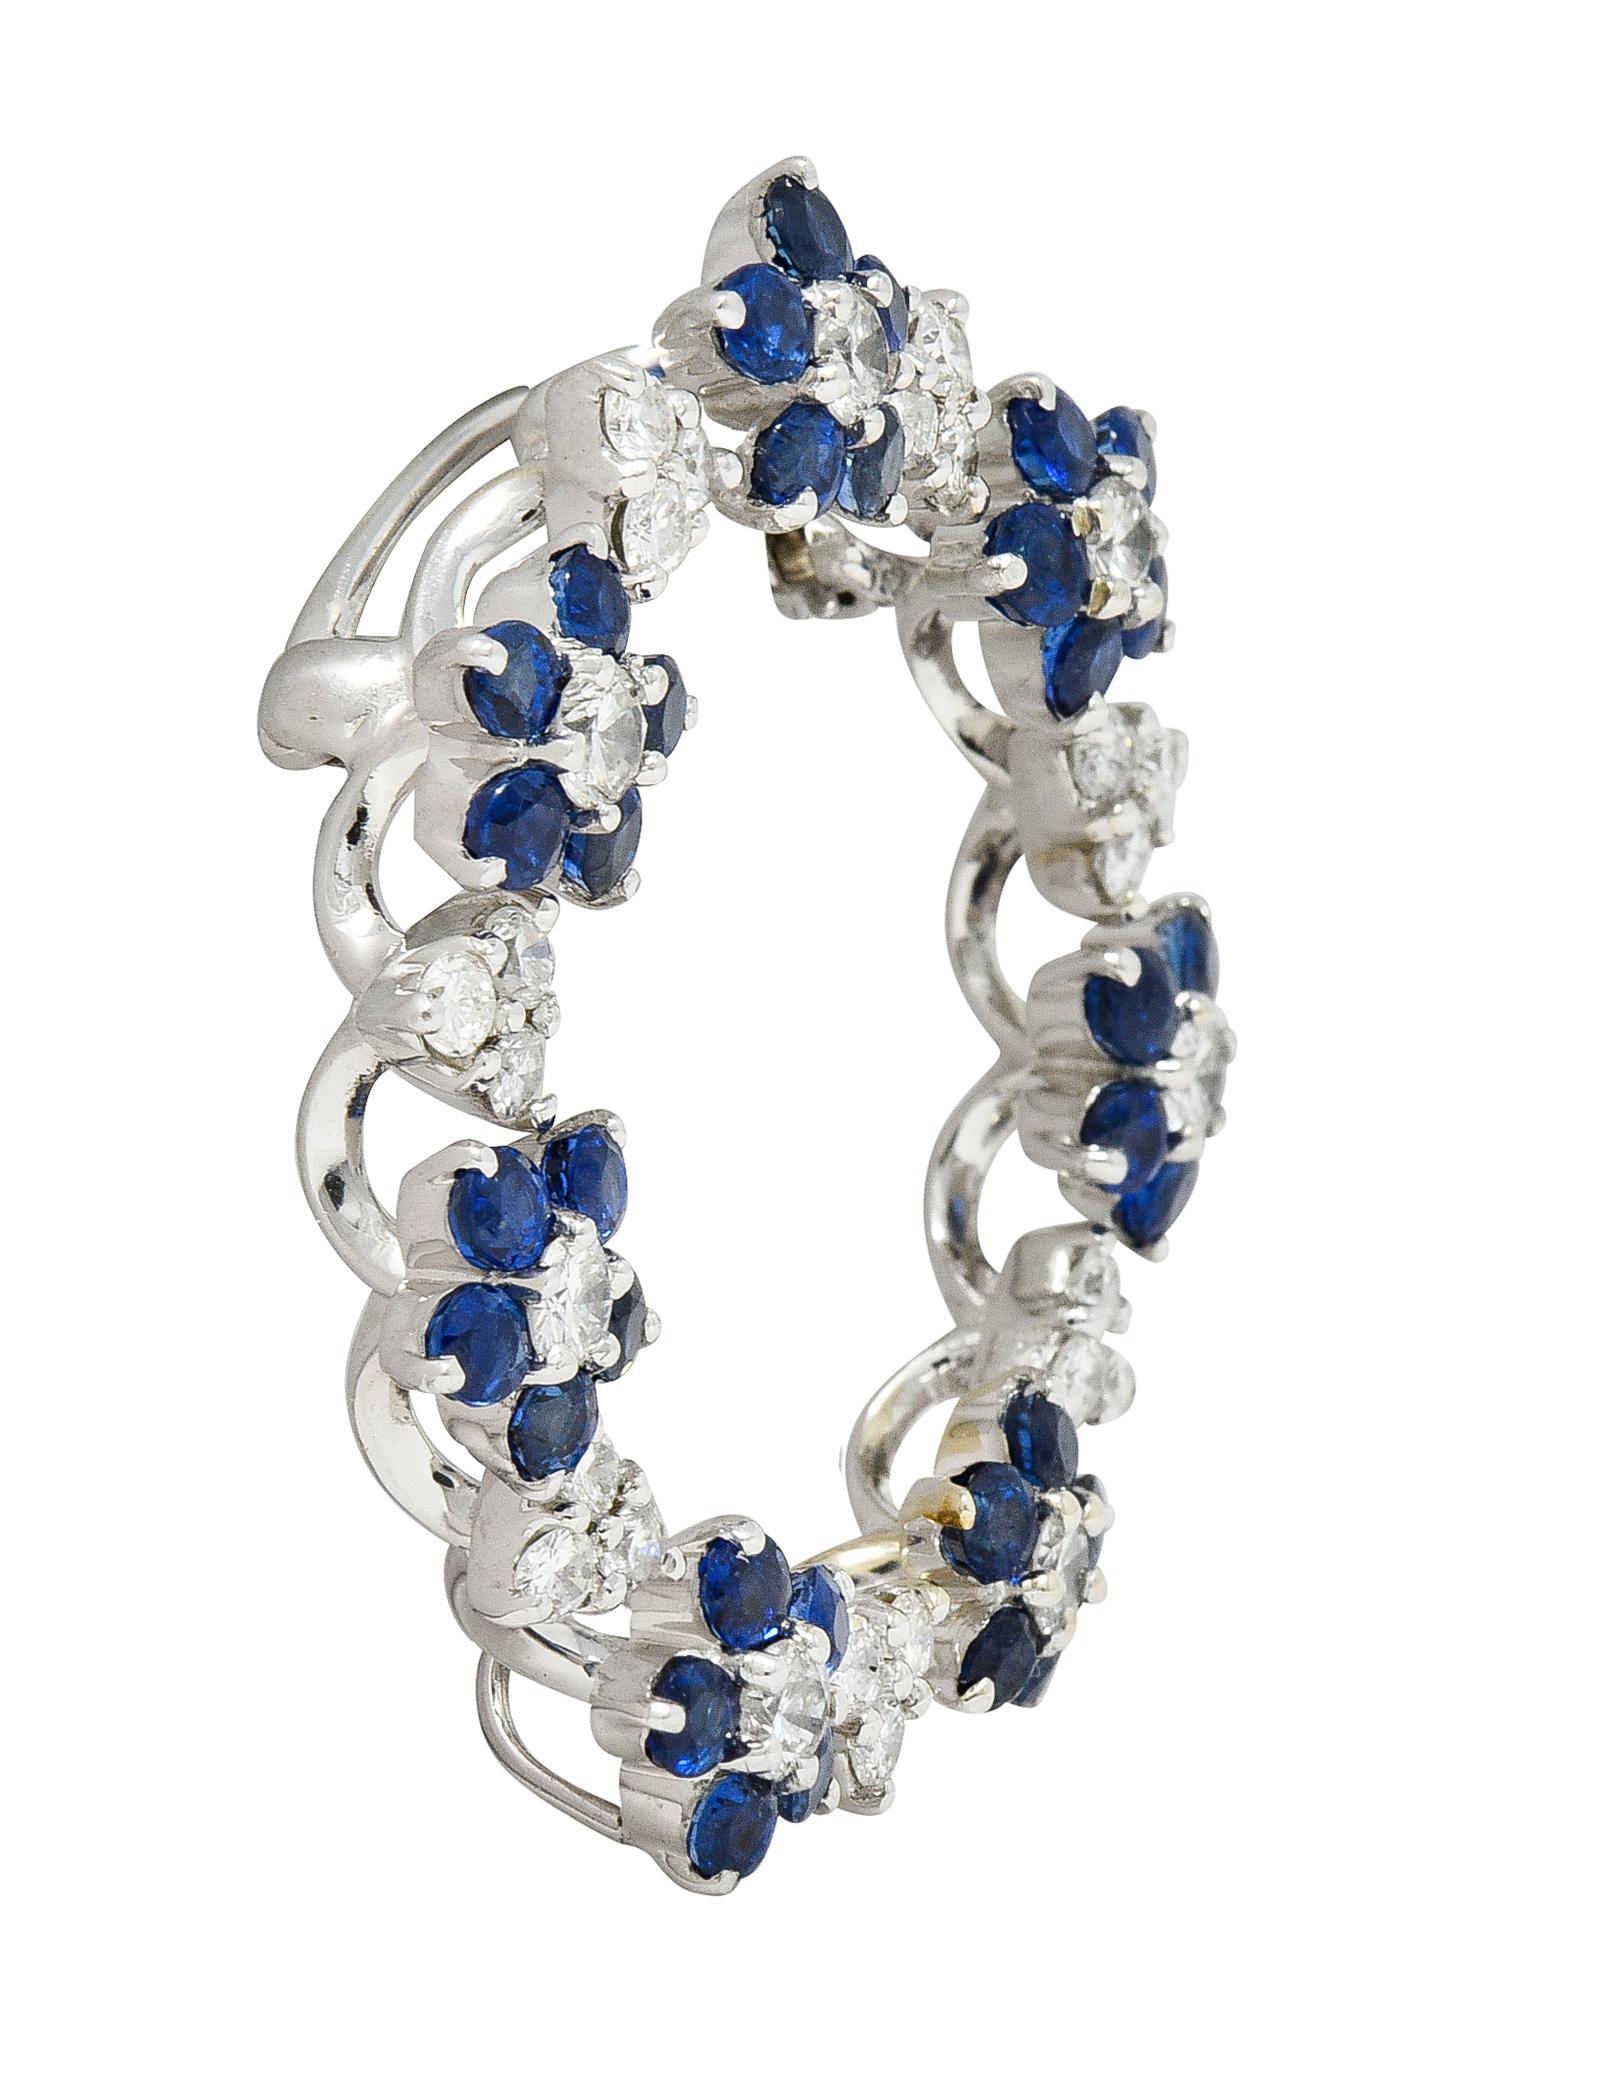 Designed as floral and trefoil clusters alternating in pattern around circular form. Comprised of round cut sapphires and round brilliant cut diamonds - prong set. Sapphires weigh approximately 2.45 carats total - transparent medium blue. Diamonds